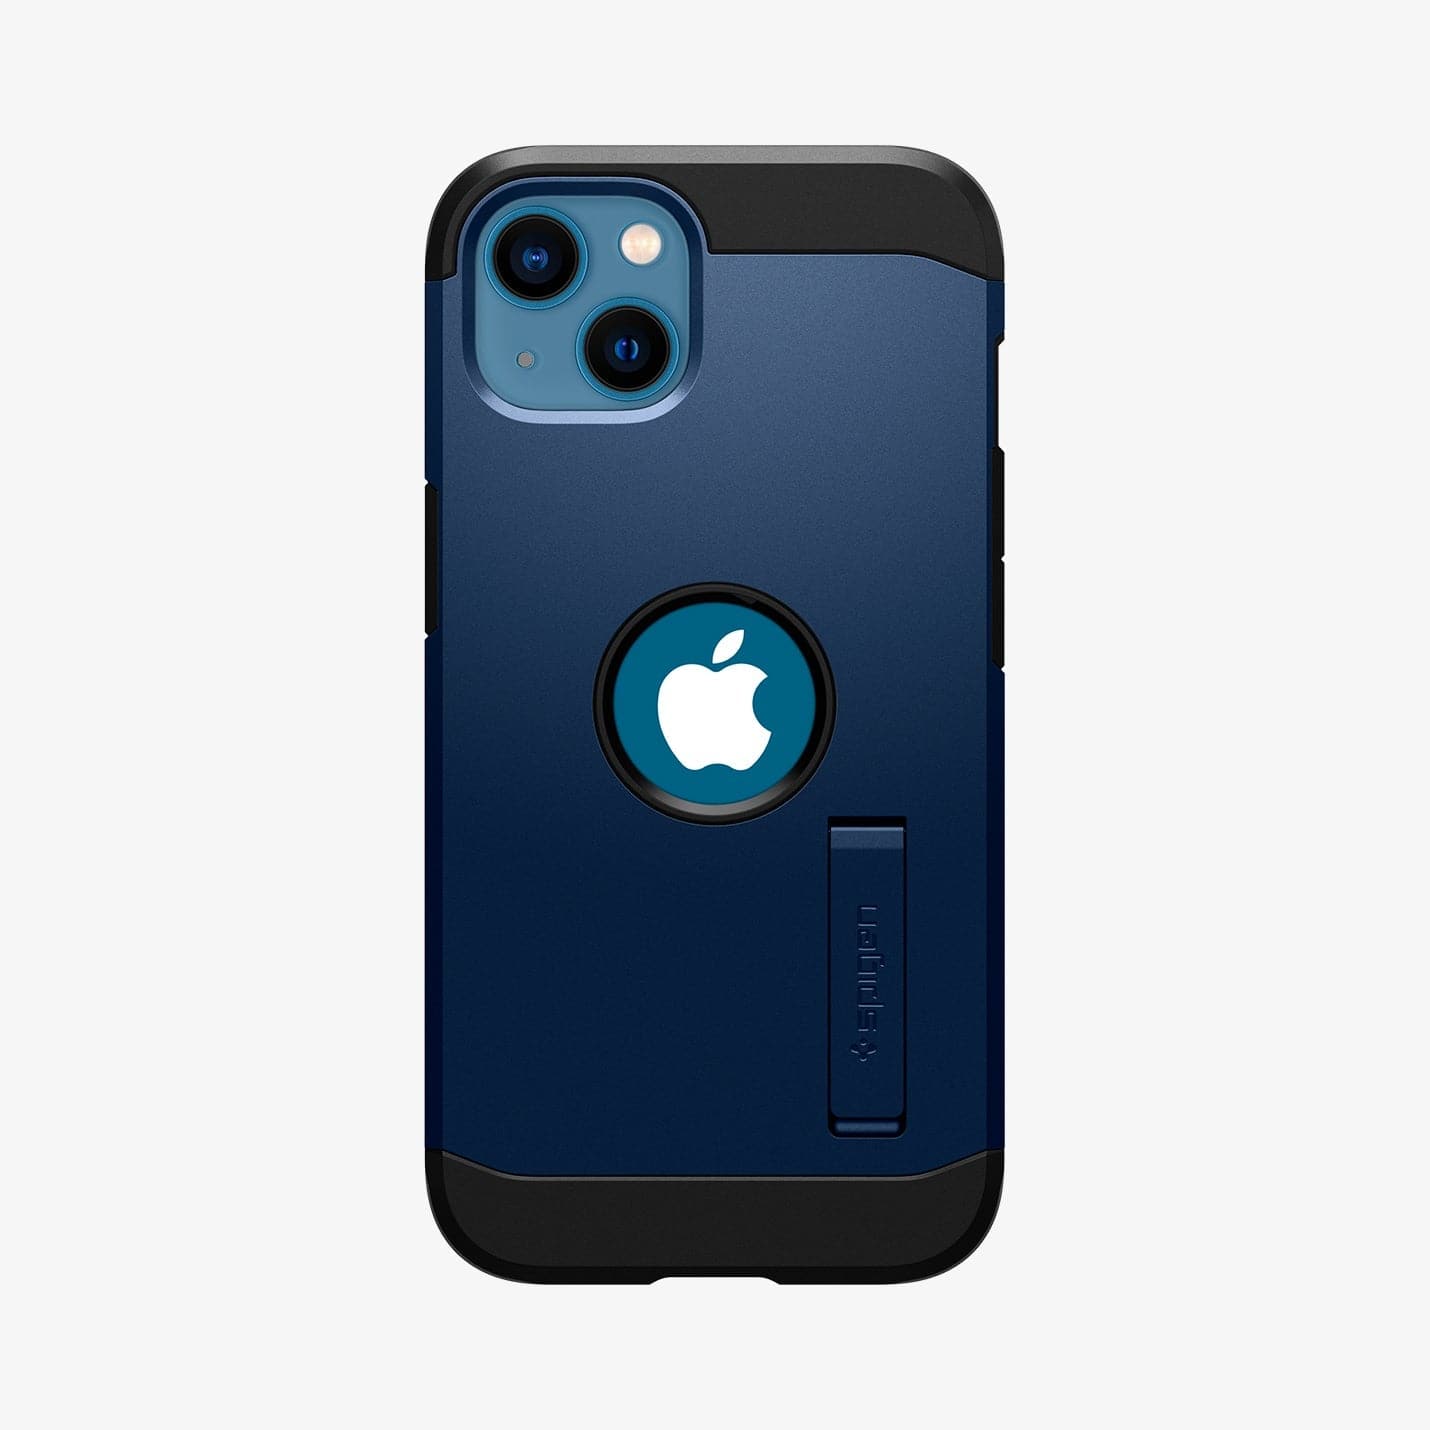 ACS03333 - iPhone 13 Mini Case Tough Armor in navy blue showing the back